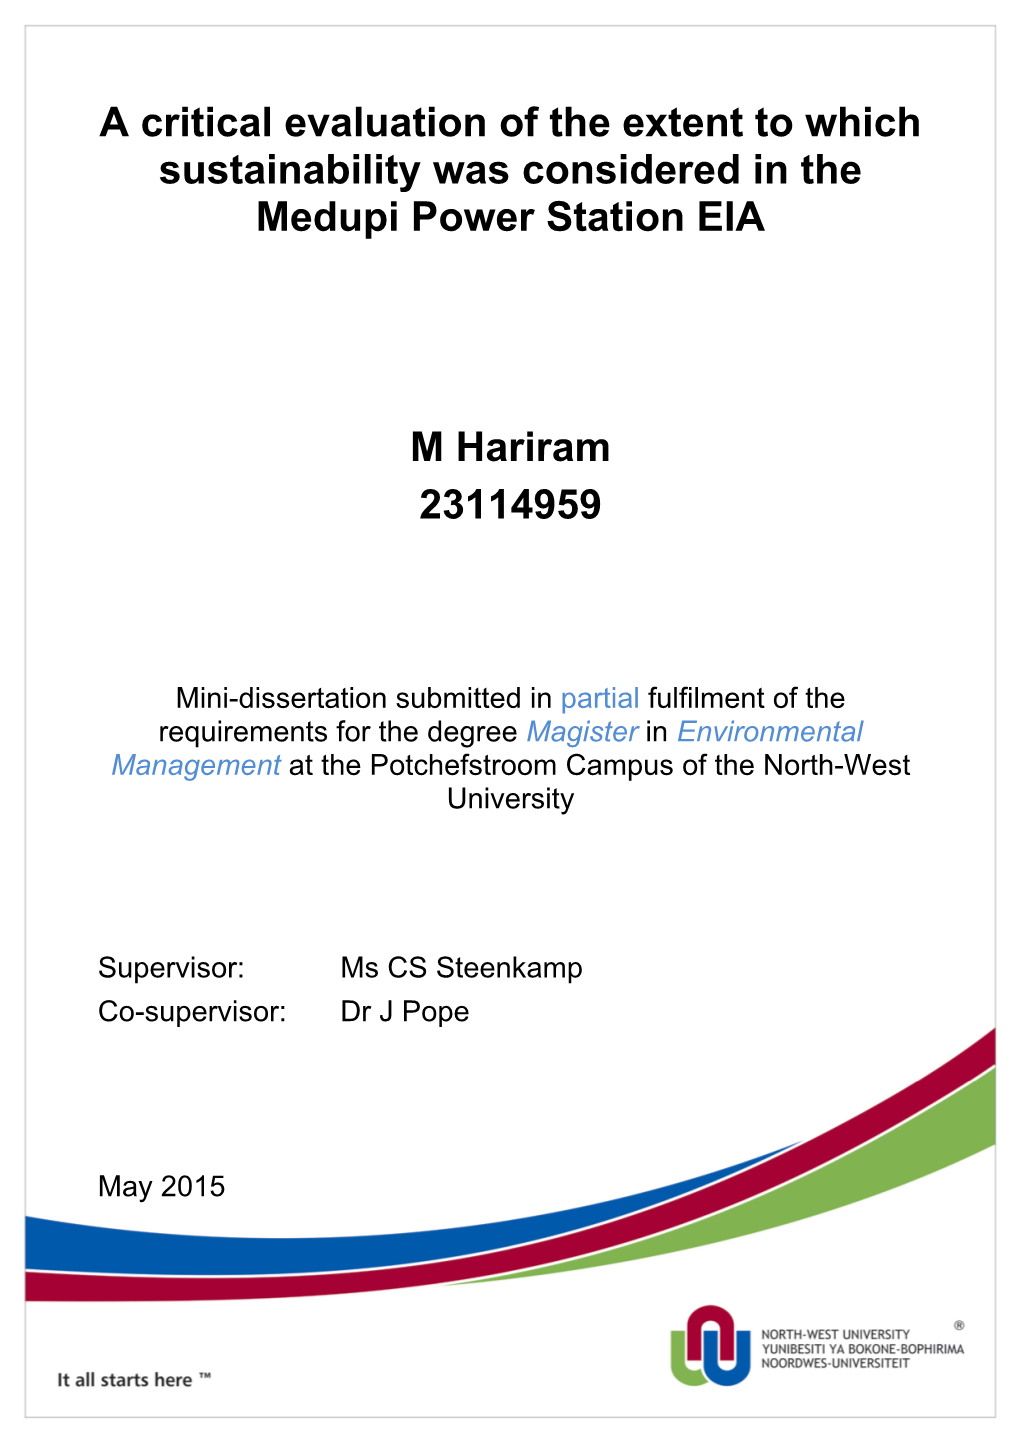 A Critical Evaluation of the Extent to Which Sustainability Was Considered in the Medupi Power Station EIA